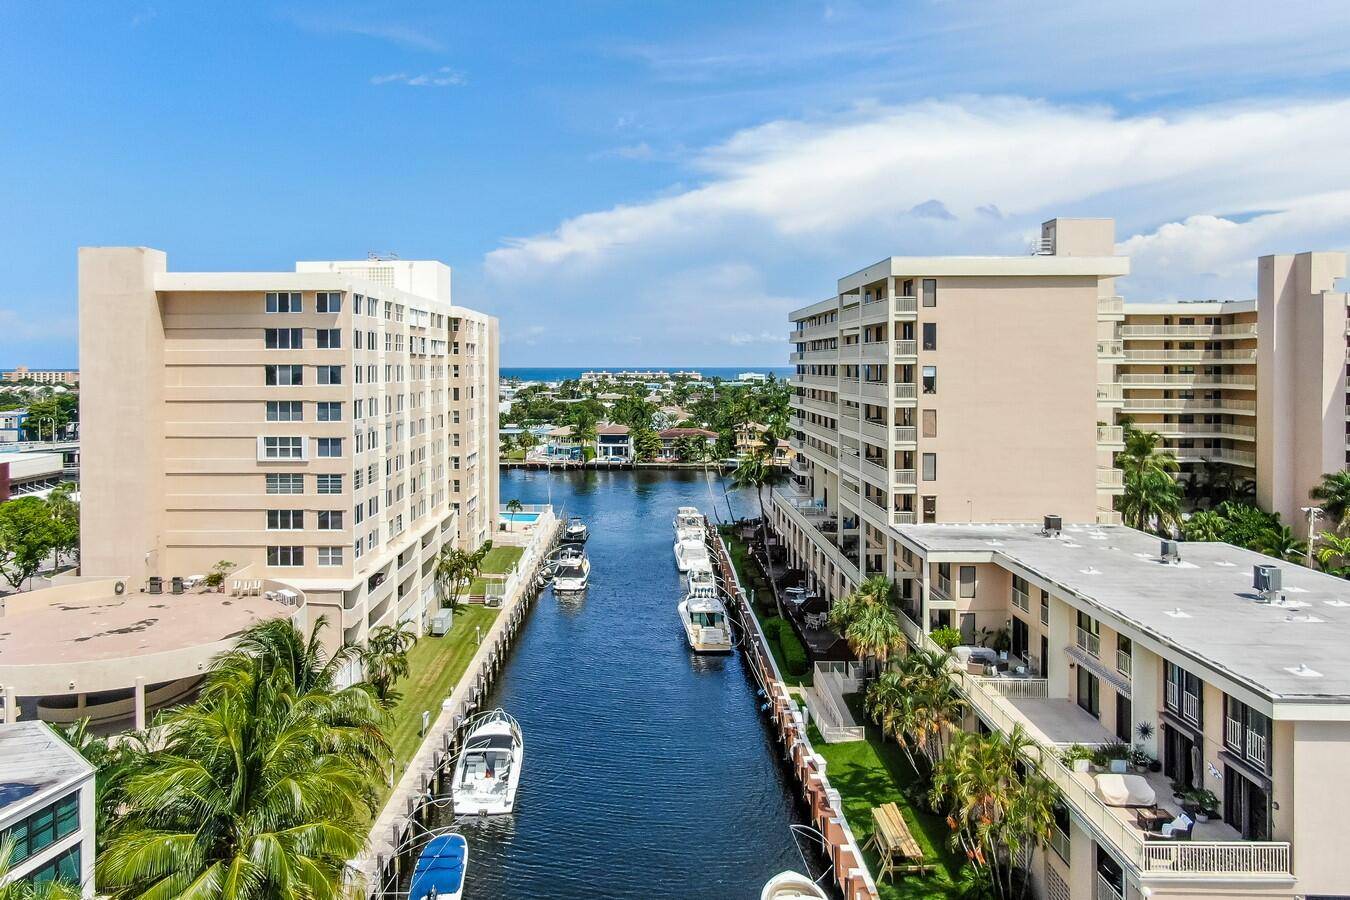 Spectacular water views await you in this spacious 2 bedroom, 2 bath penthouse in The Pilot House.